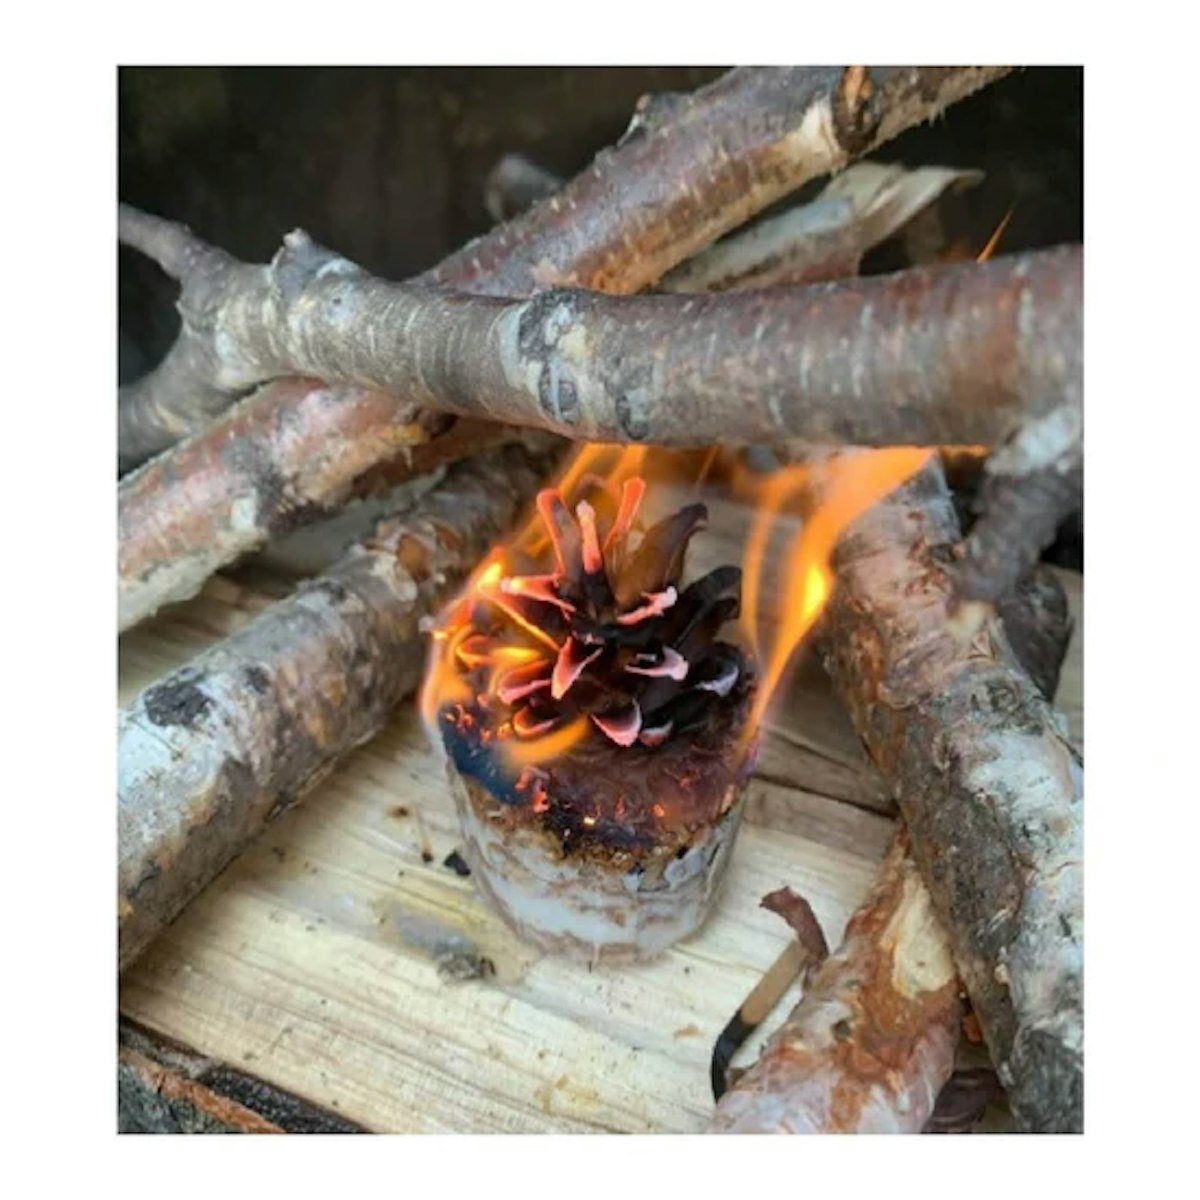 A pine cone burning on fire.